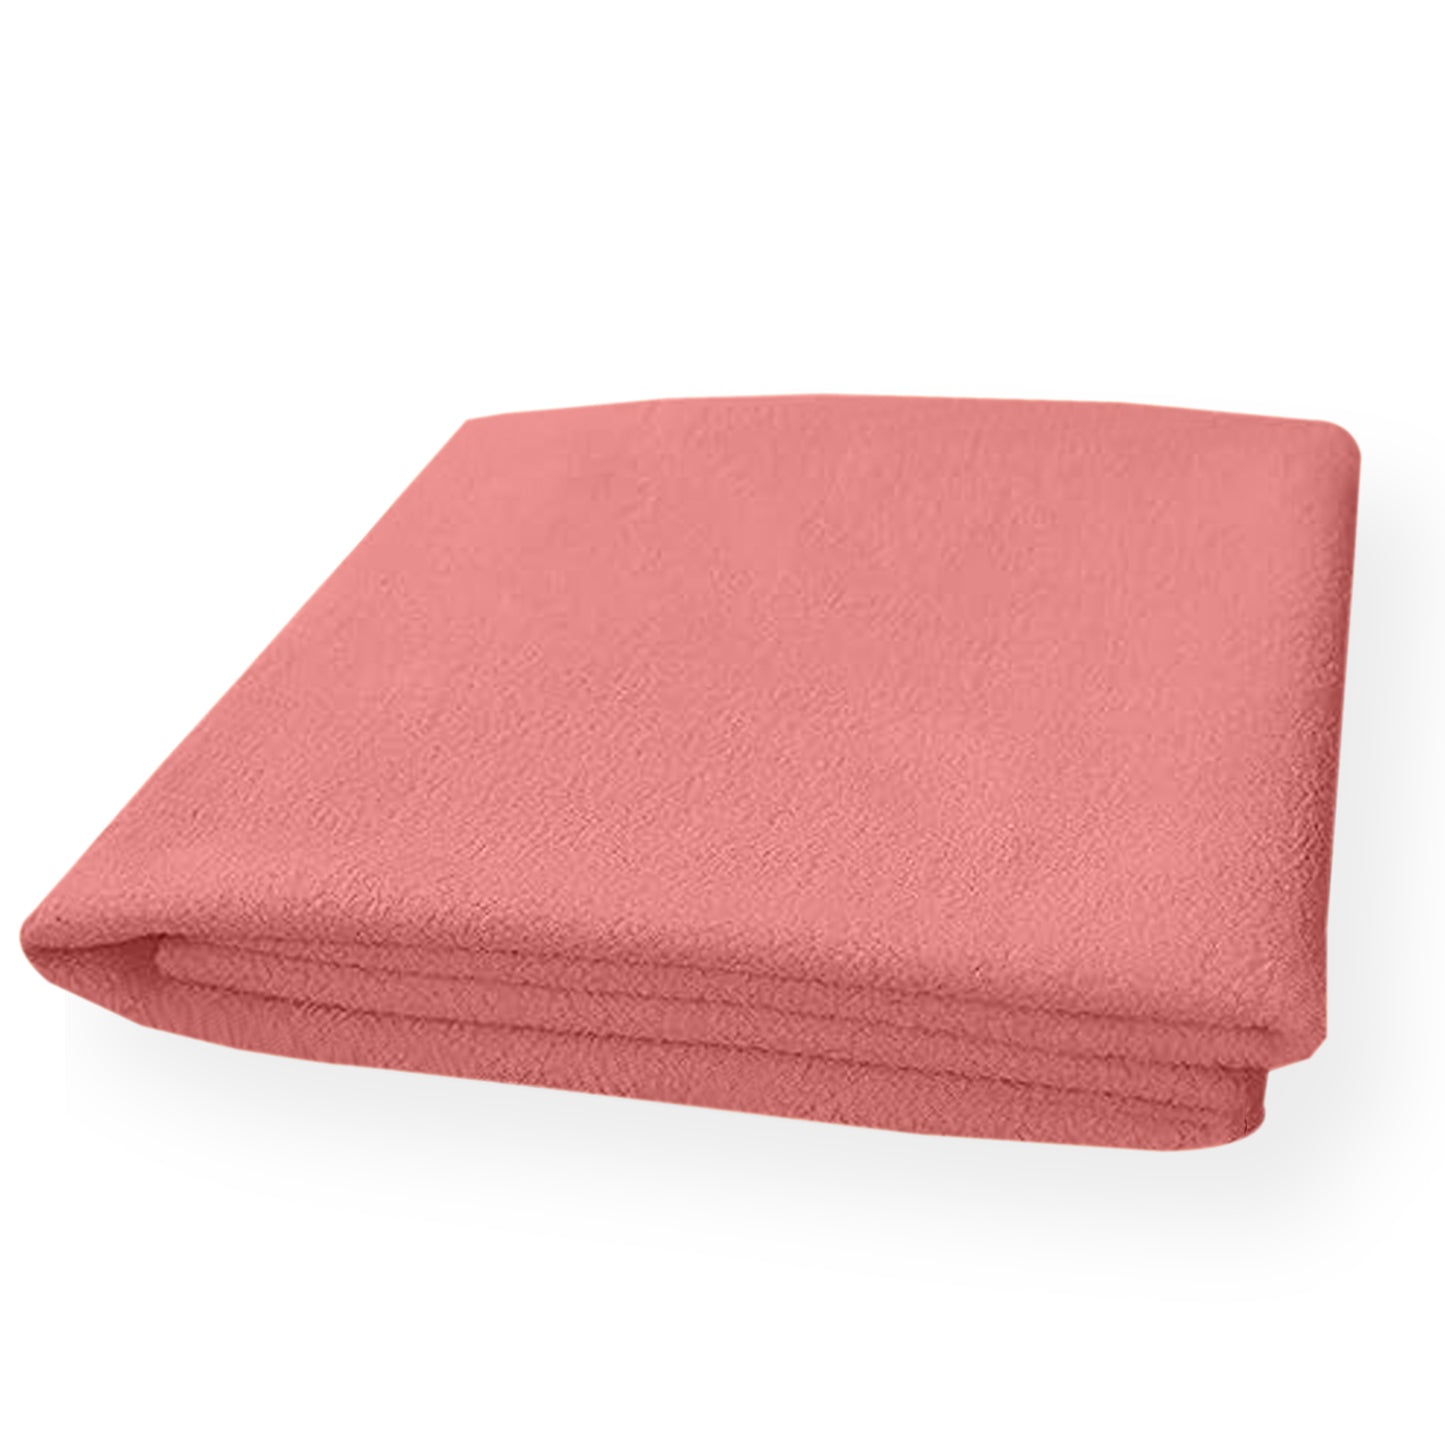 Waterproof Quick Dry Protector Sheet, Baby Bed Protector (140 X 100 CM), Pack of 1 -SELMON ROSE